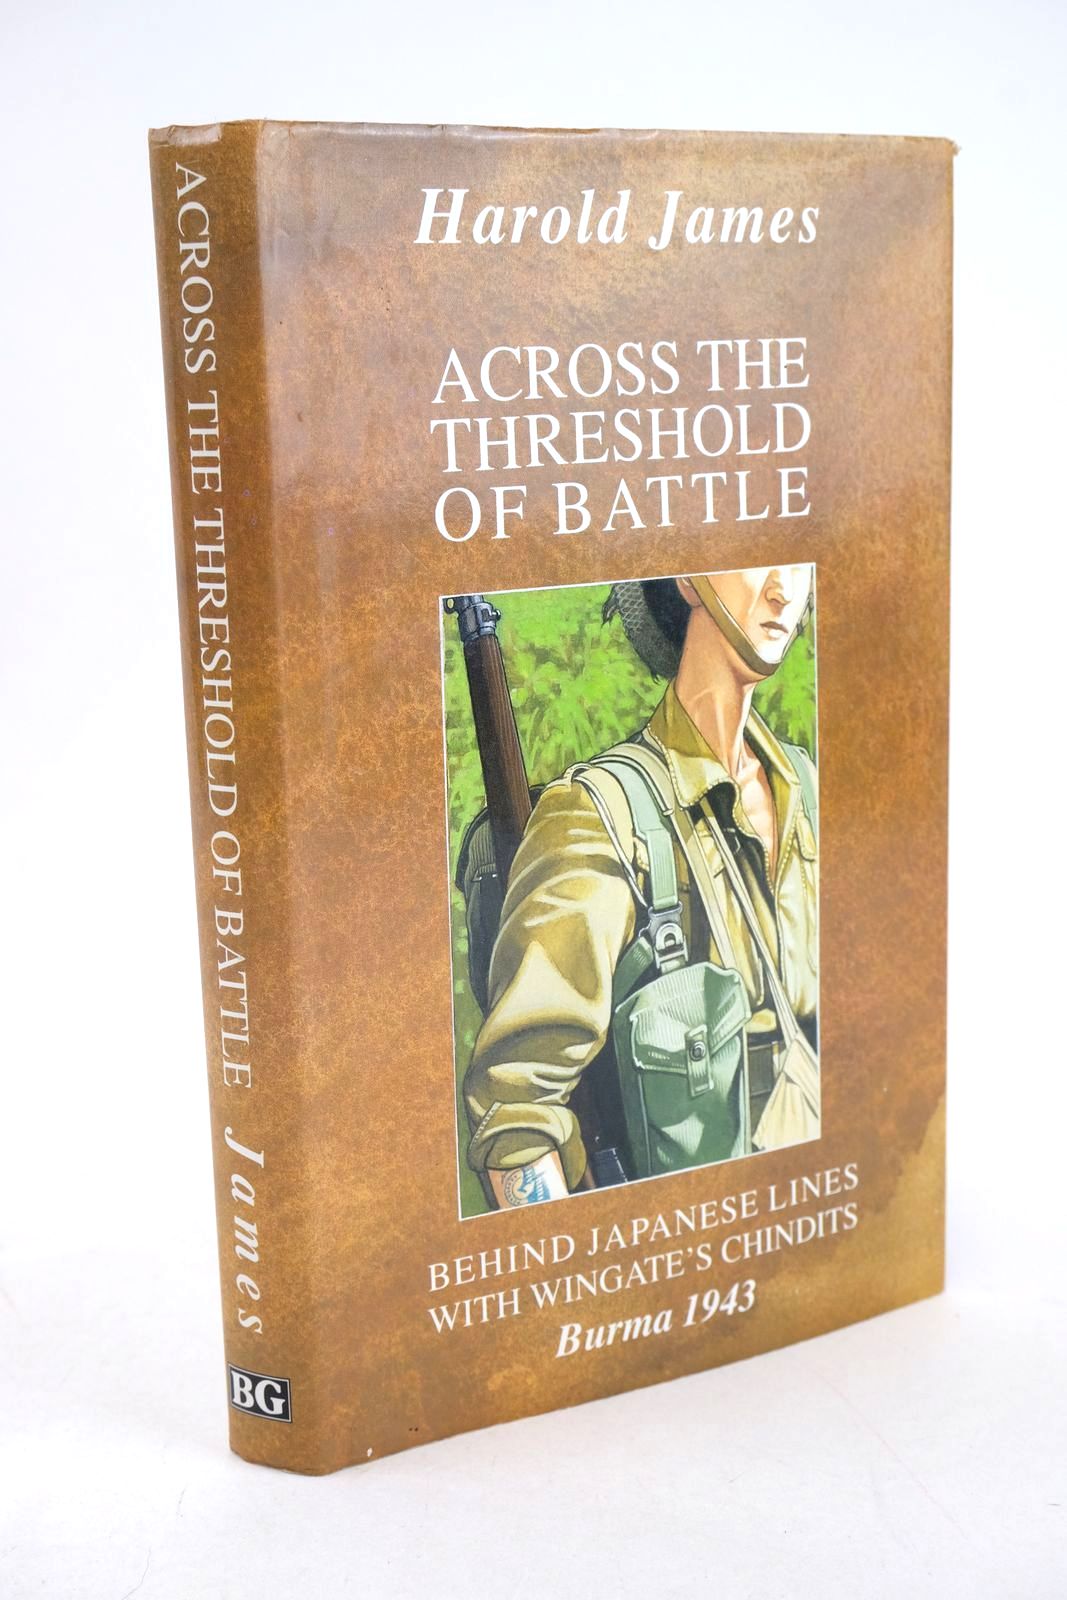 Photo of ACROSS THE THRESHOLD OF BATTLE written by James, Harold published by The Book Guild Ltd. (STOCK CODE: 1327467)  for sale by Stella & Rose's Books